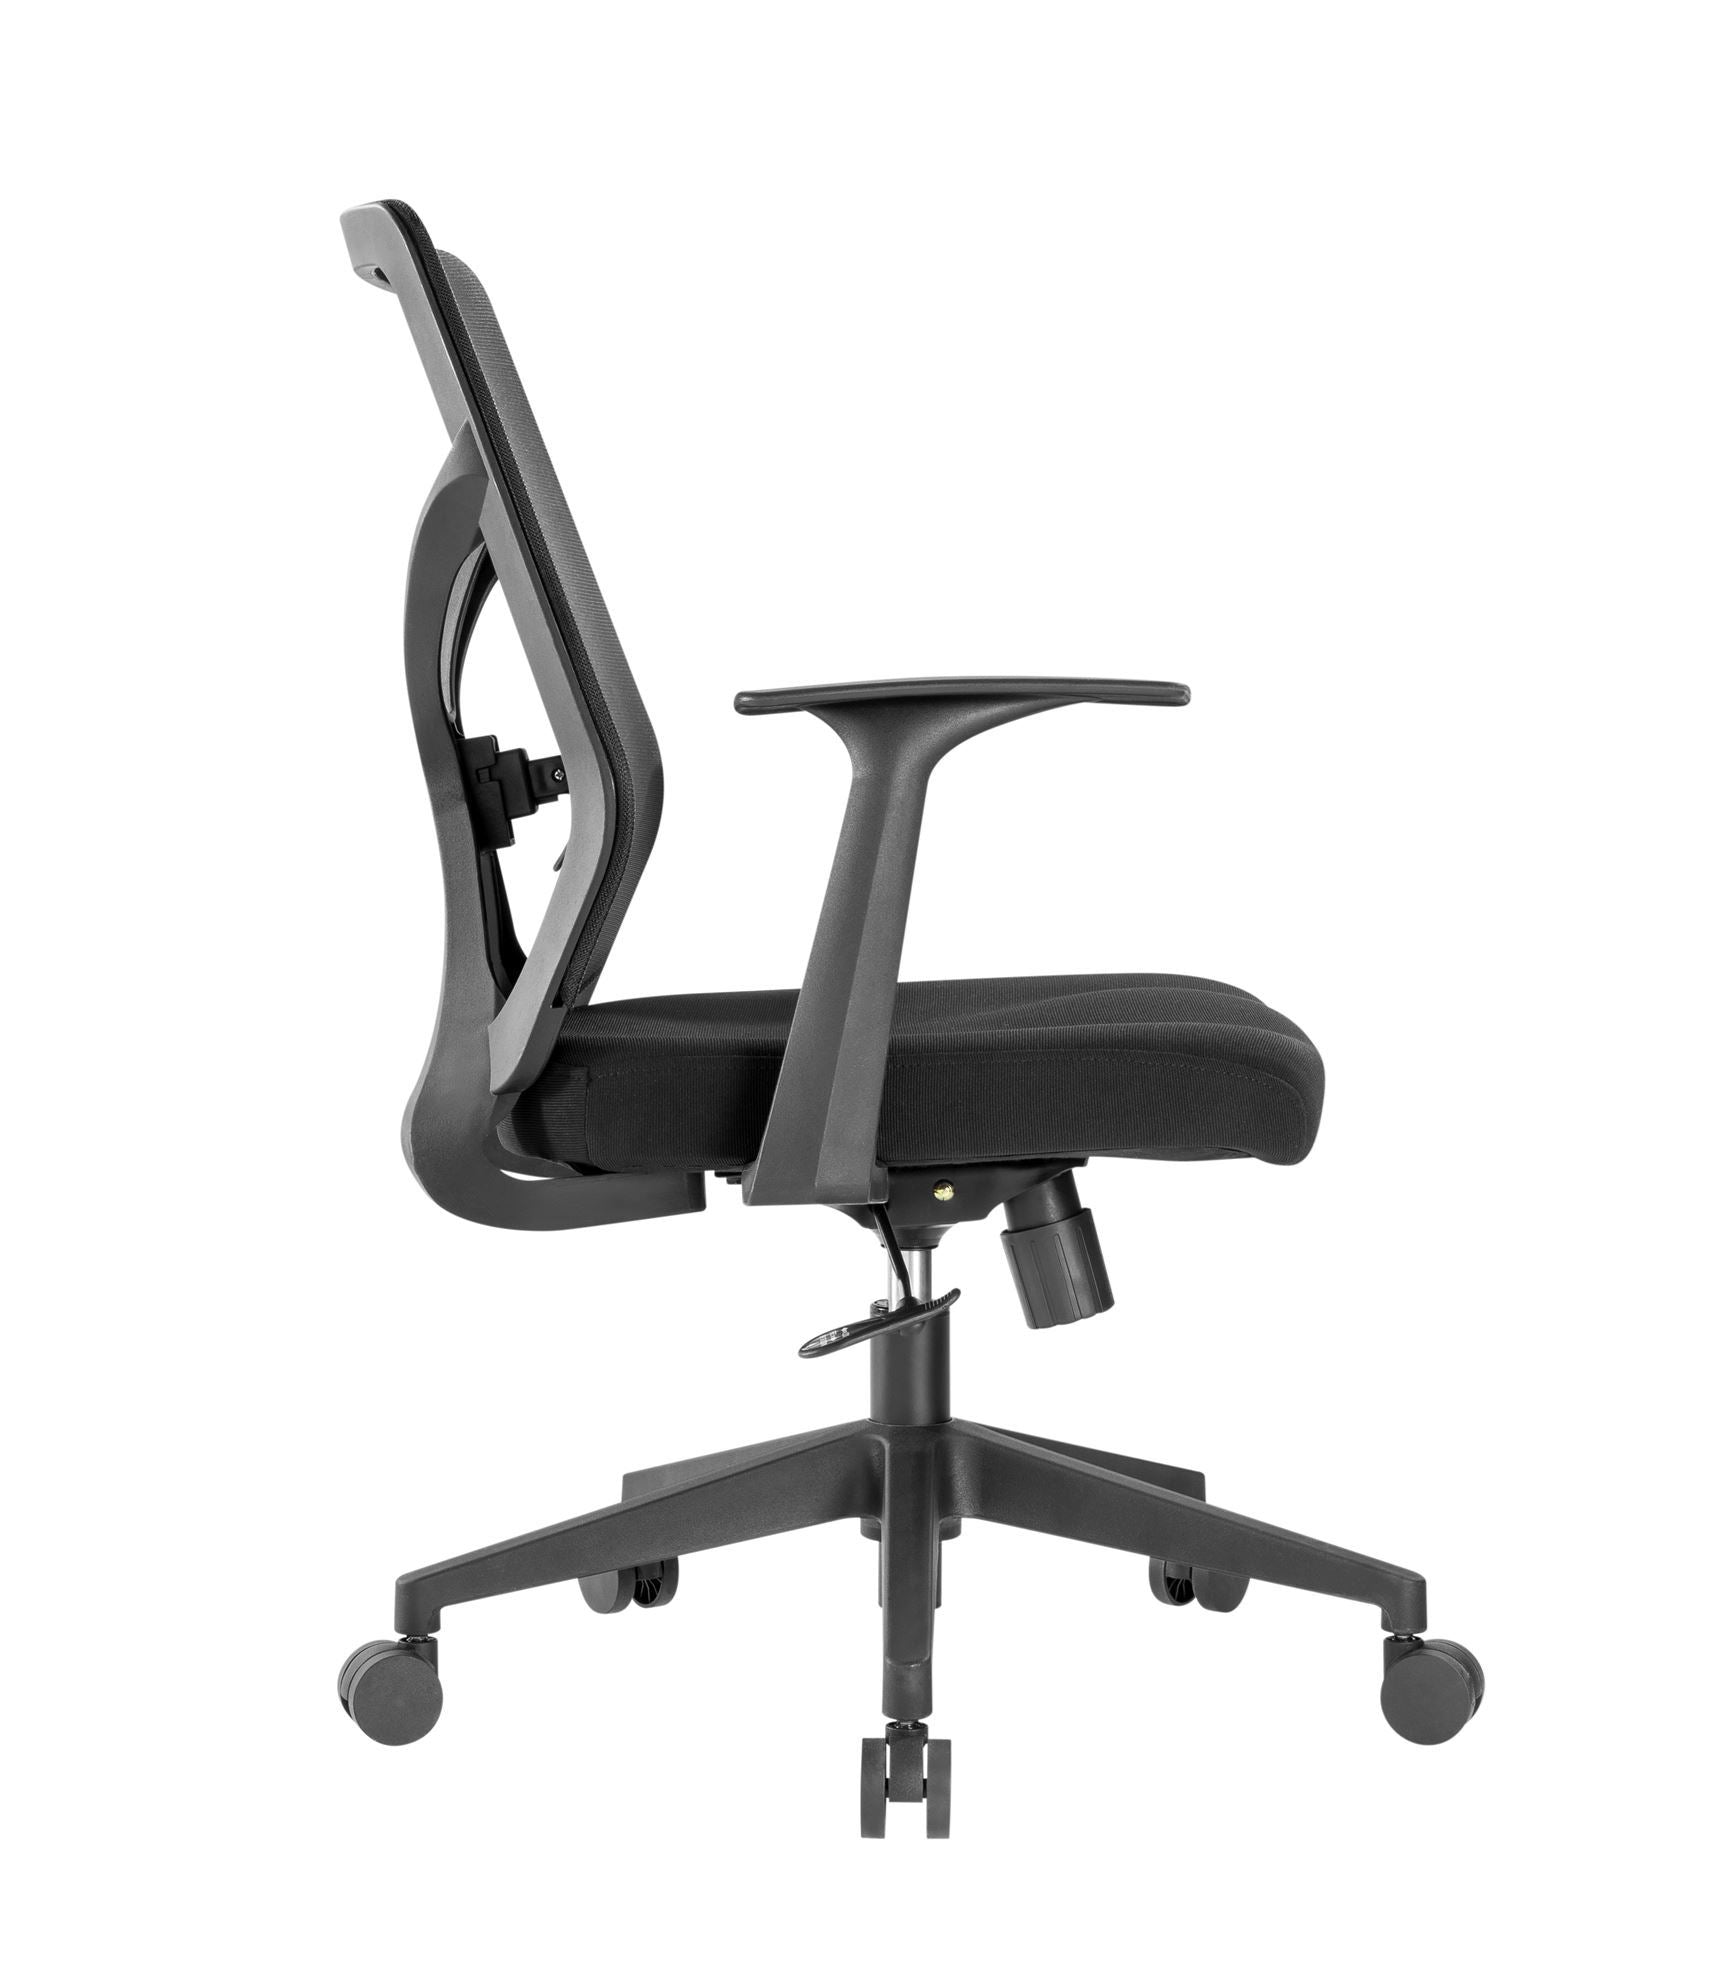 BRATECK_Premium_Office_Chair_with_Superior_Lumbar_Support._Ergonomic_with_Breathable_Mesh_Back_Pneumatic_Seat-Height_Adjustment,_Adjustable_Tilt-back,_PU_Hooded_Casters._Black_Colour.